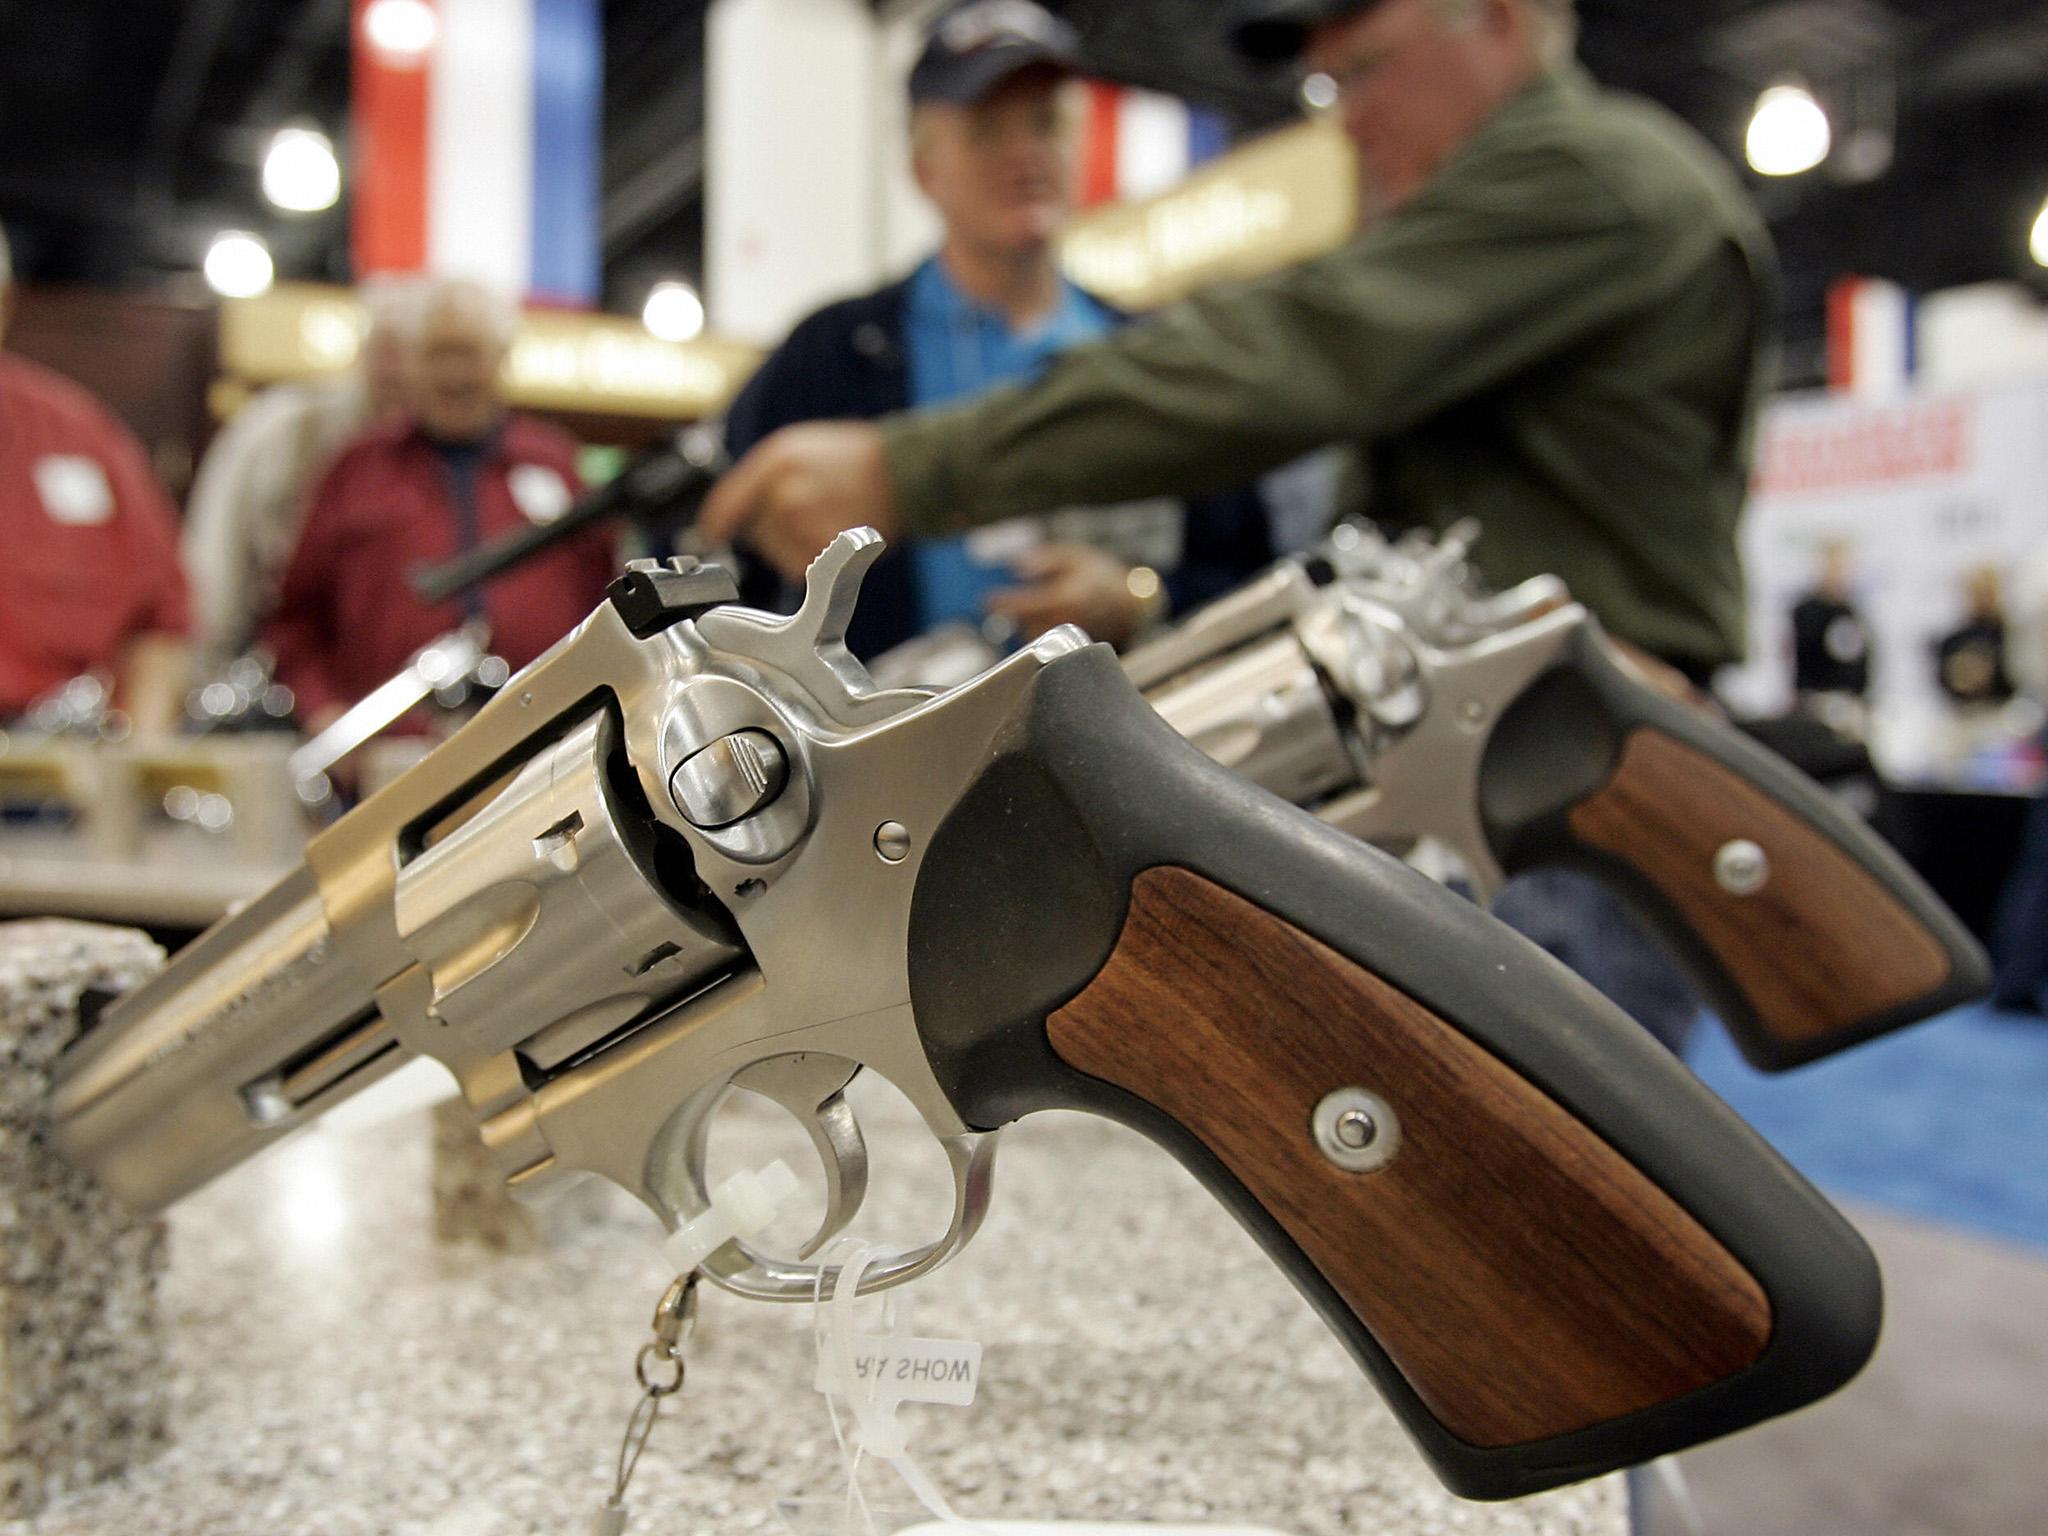 The National Rifle Association wants to ensure that Americans can go anywhere they want with concealed weapons, if they have a permit